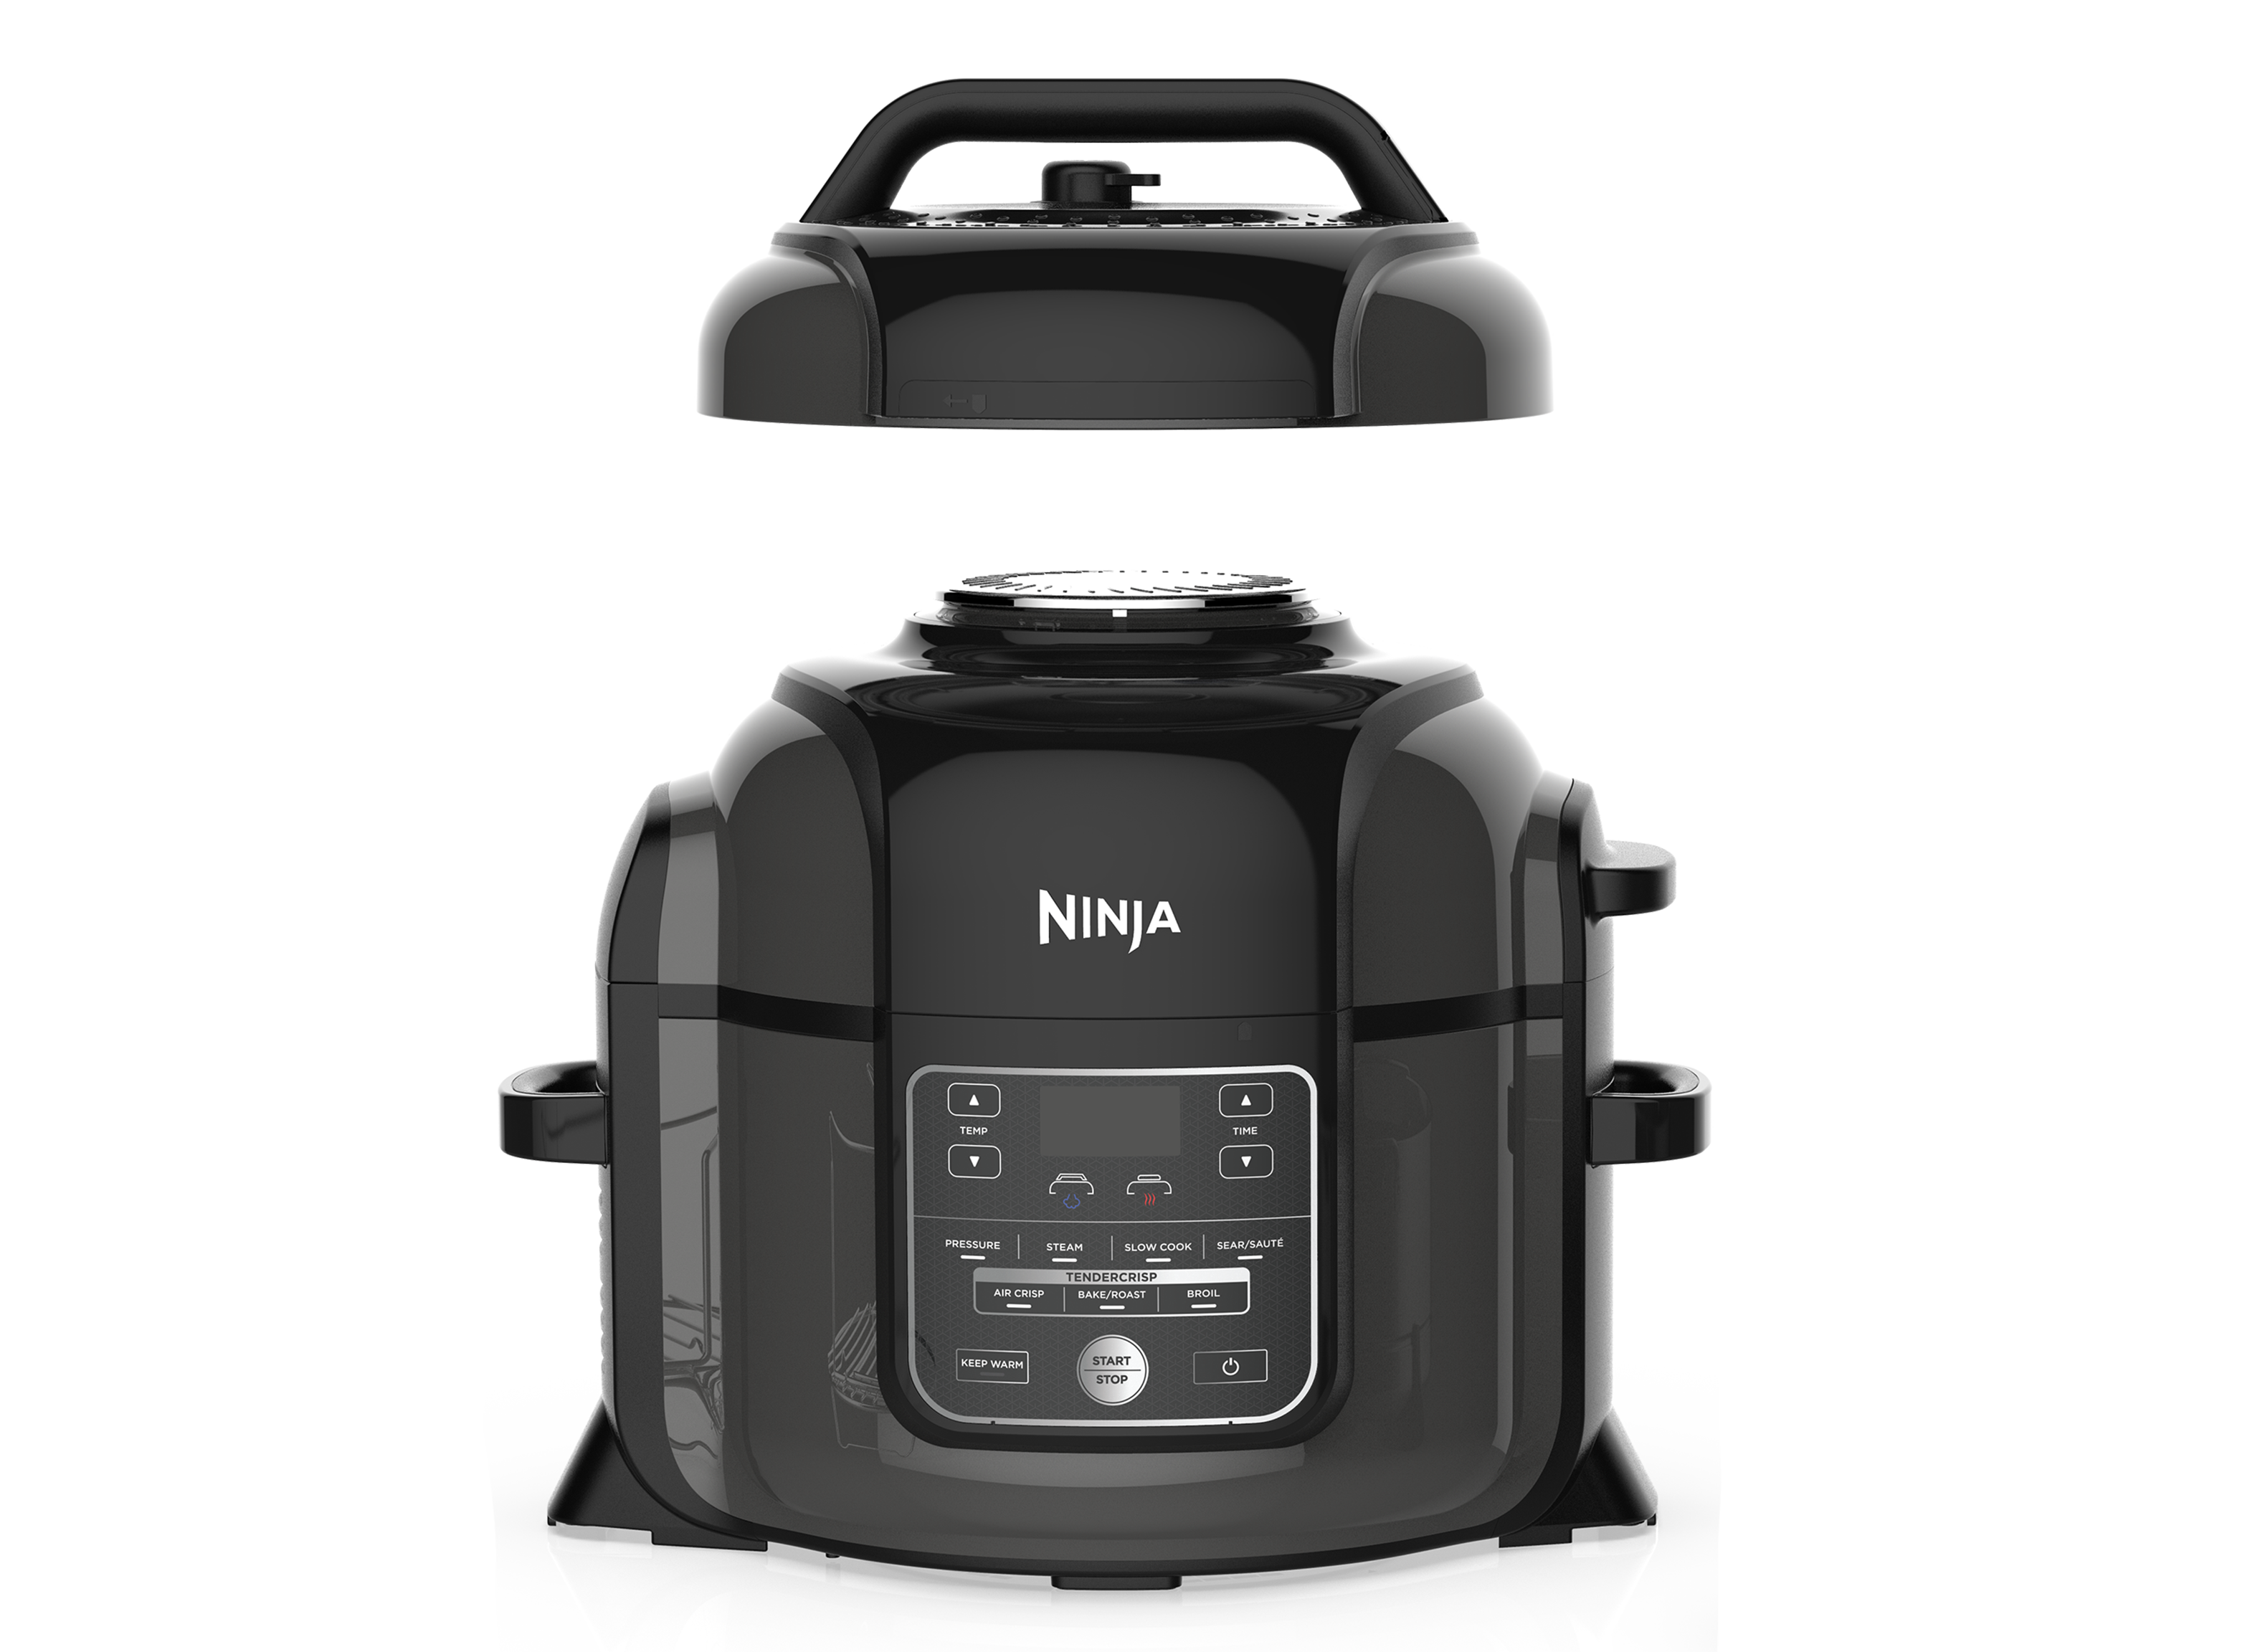 https://crdms.images.consumerreports.org/prod/products/cr/models/398142-with-pressure-cooking-mode-ninja-foodi-op300-10003947.png